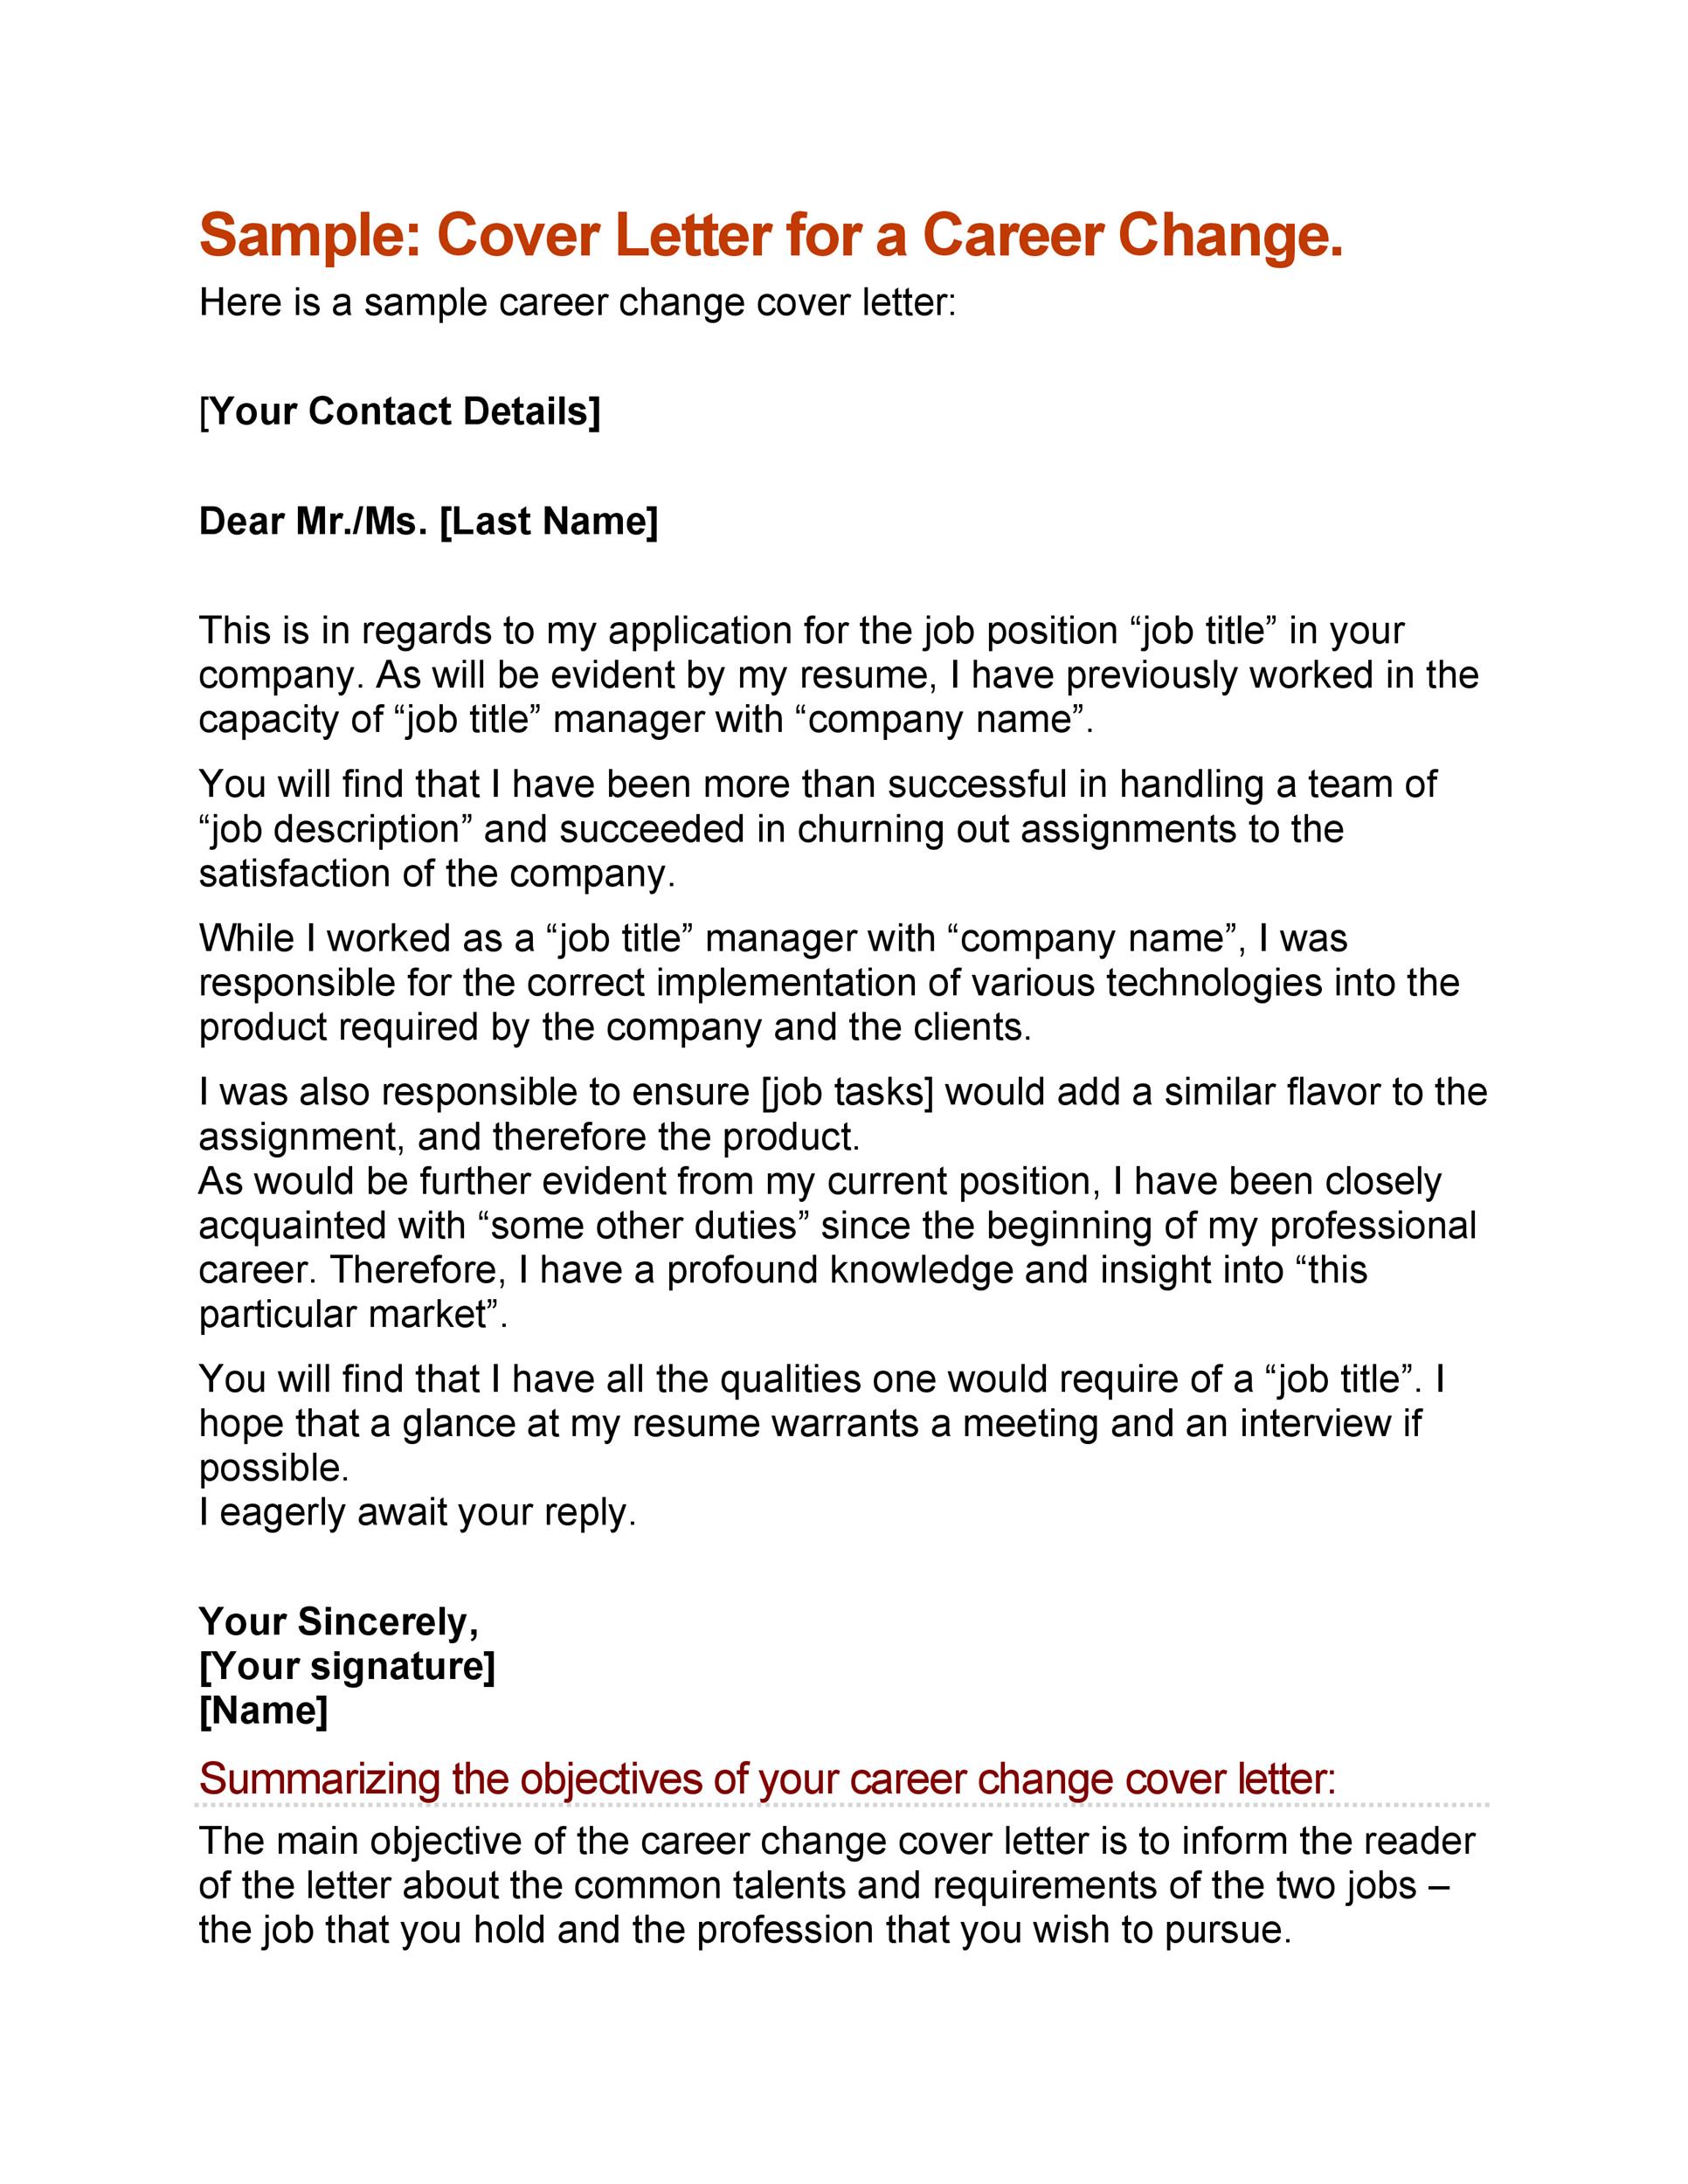 how to write change of career cover letter